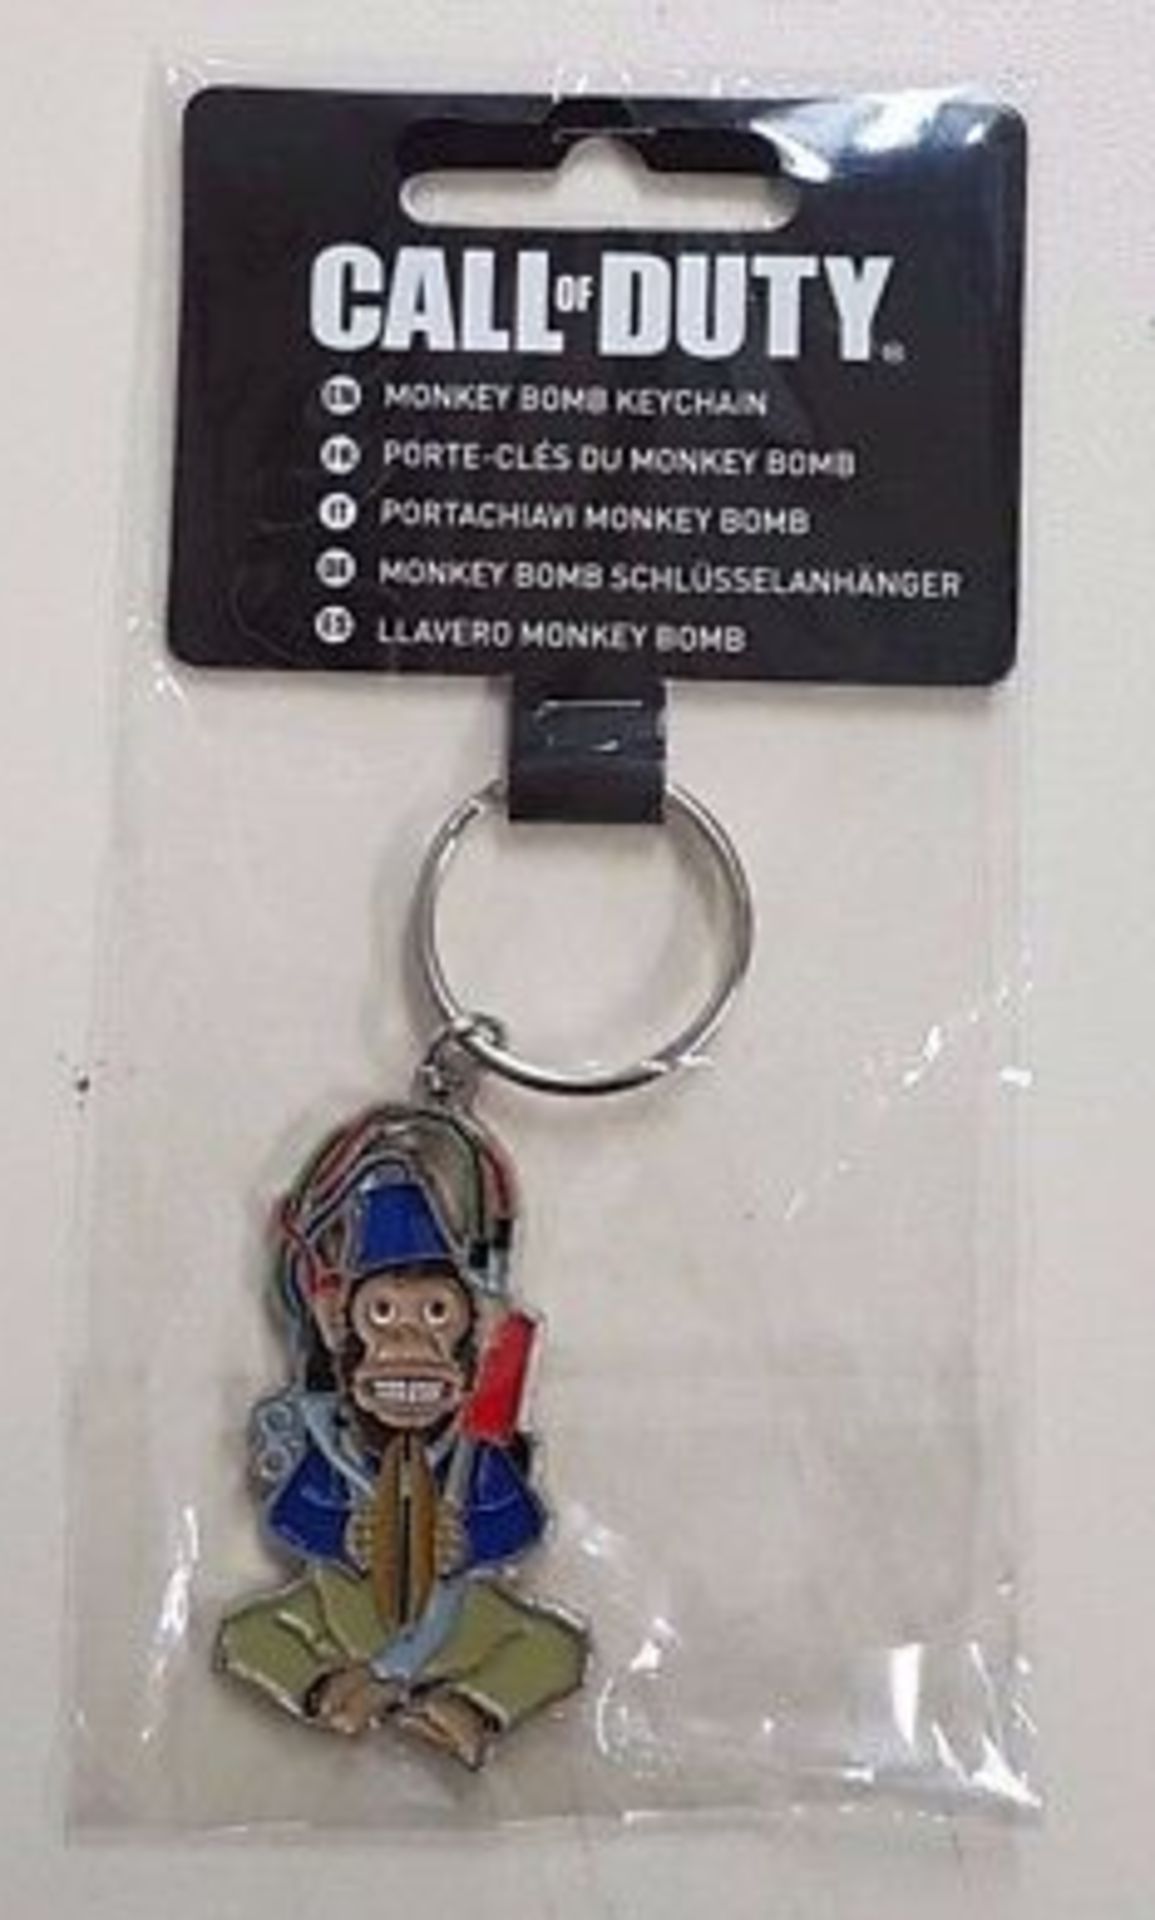 Official Call of Duty Monkey Bomb Key Chain